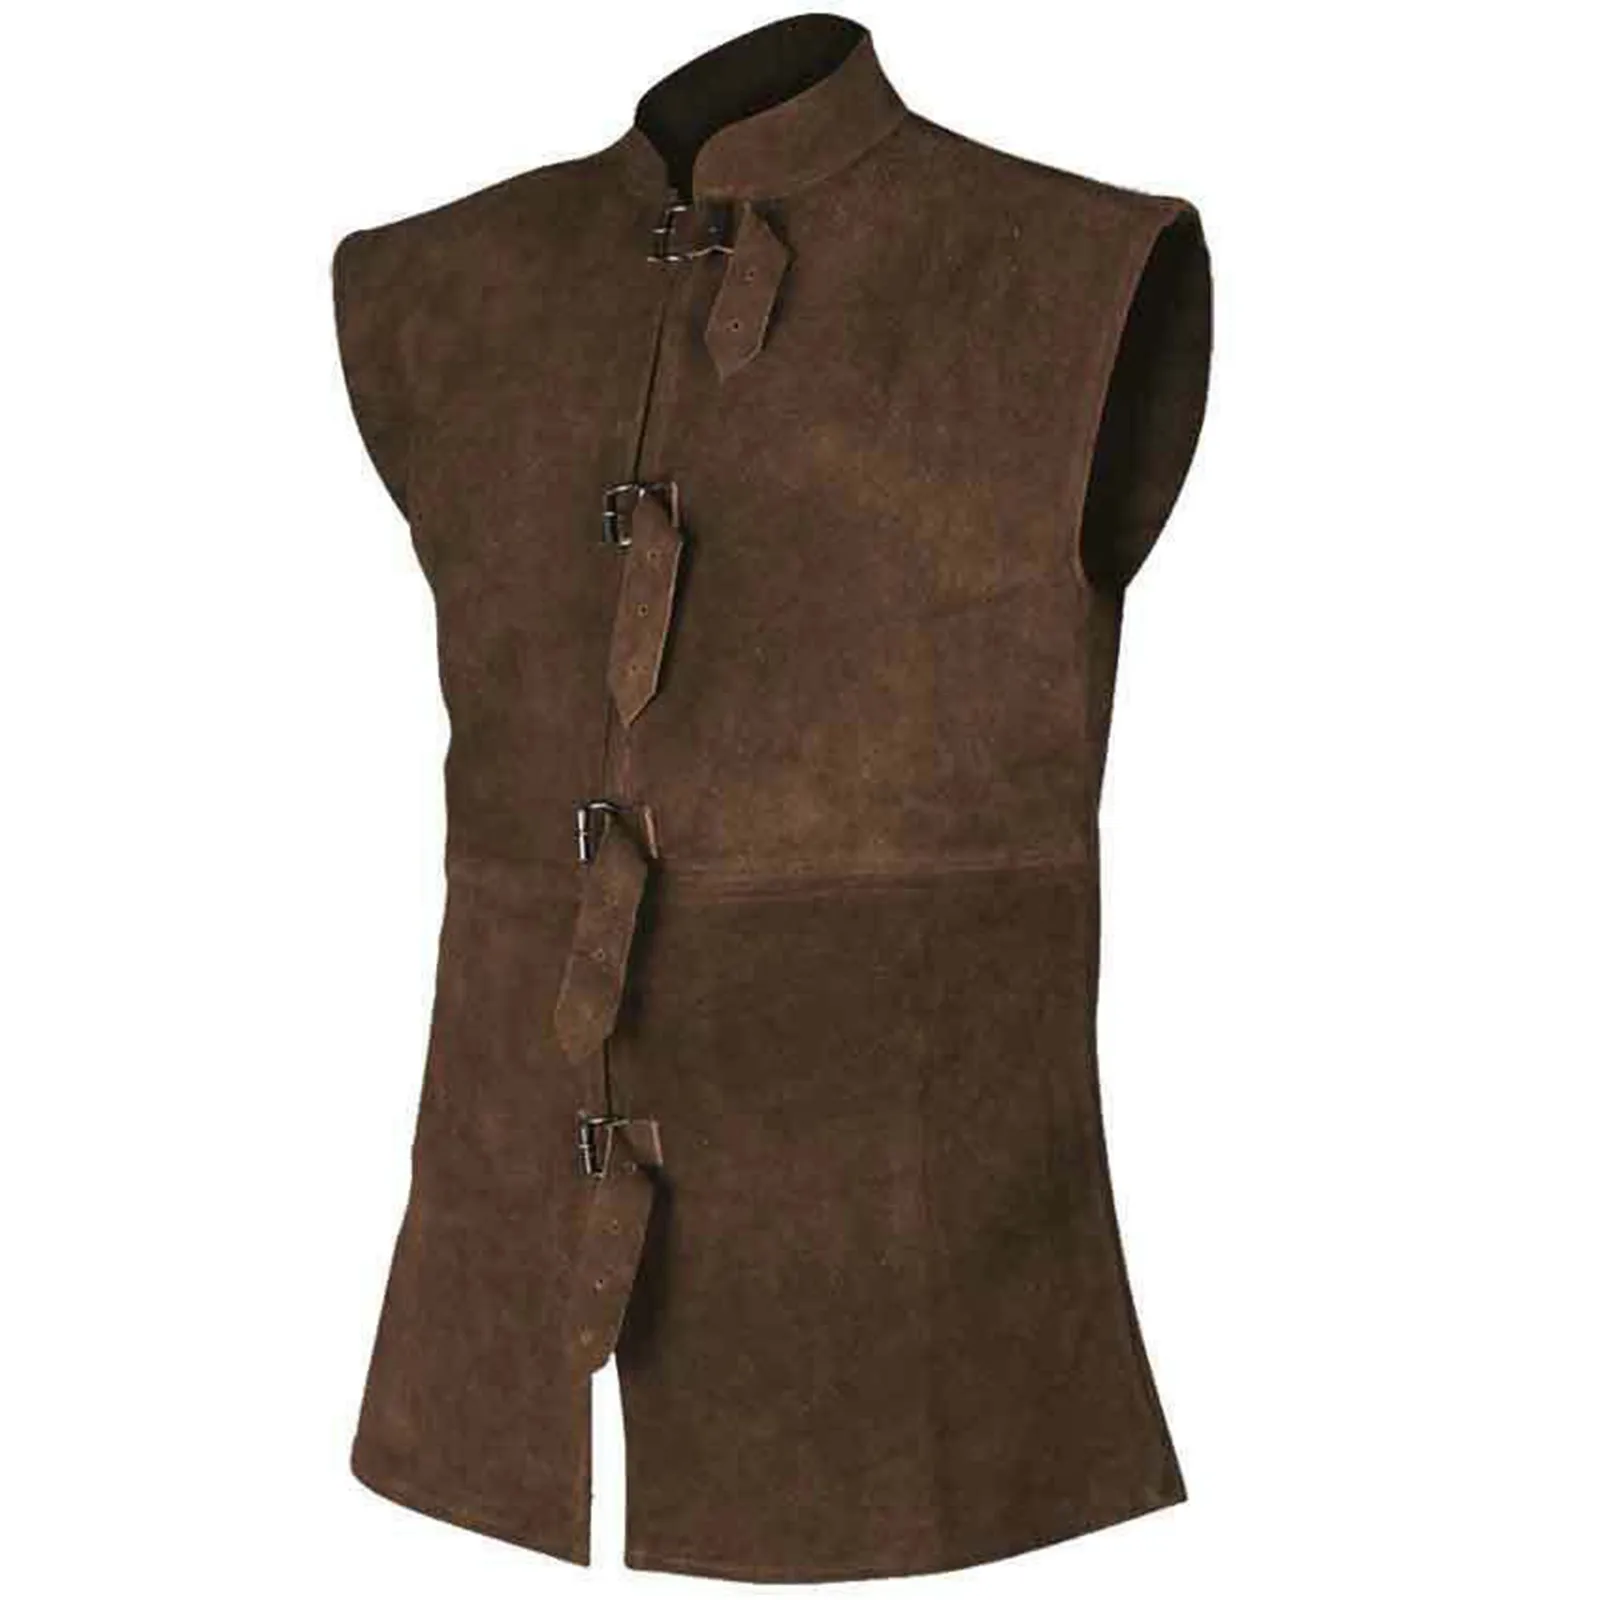 Vintage Suede Waistcoat Men Sleeveless Solid Color Stand-Up Collar Buttons Coat Vest Spring Autumn Medieval Retro Suit Vest Male autumn new vest retro personality american vest western pioneer waistcoat side buttons design men s artisan sleeveless jacket